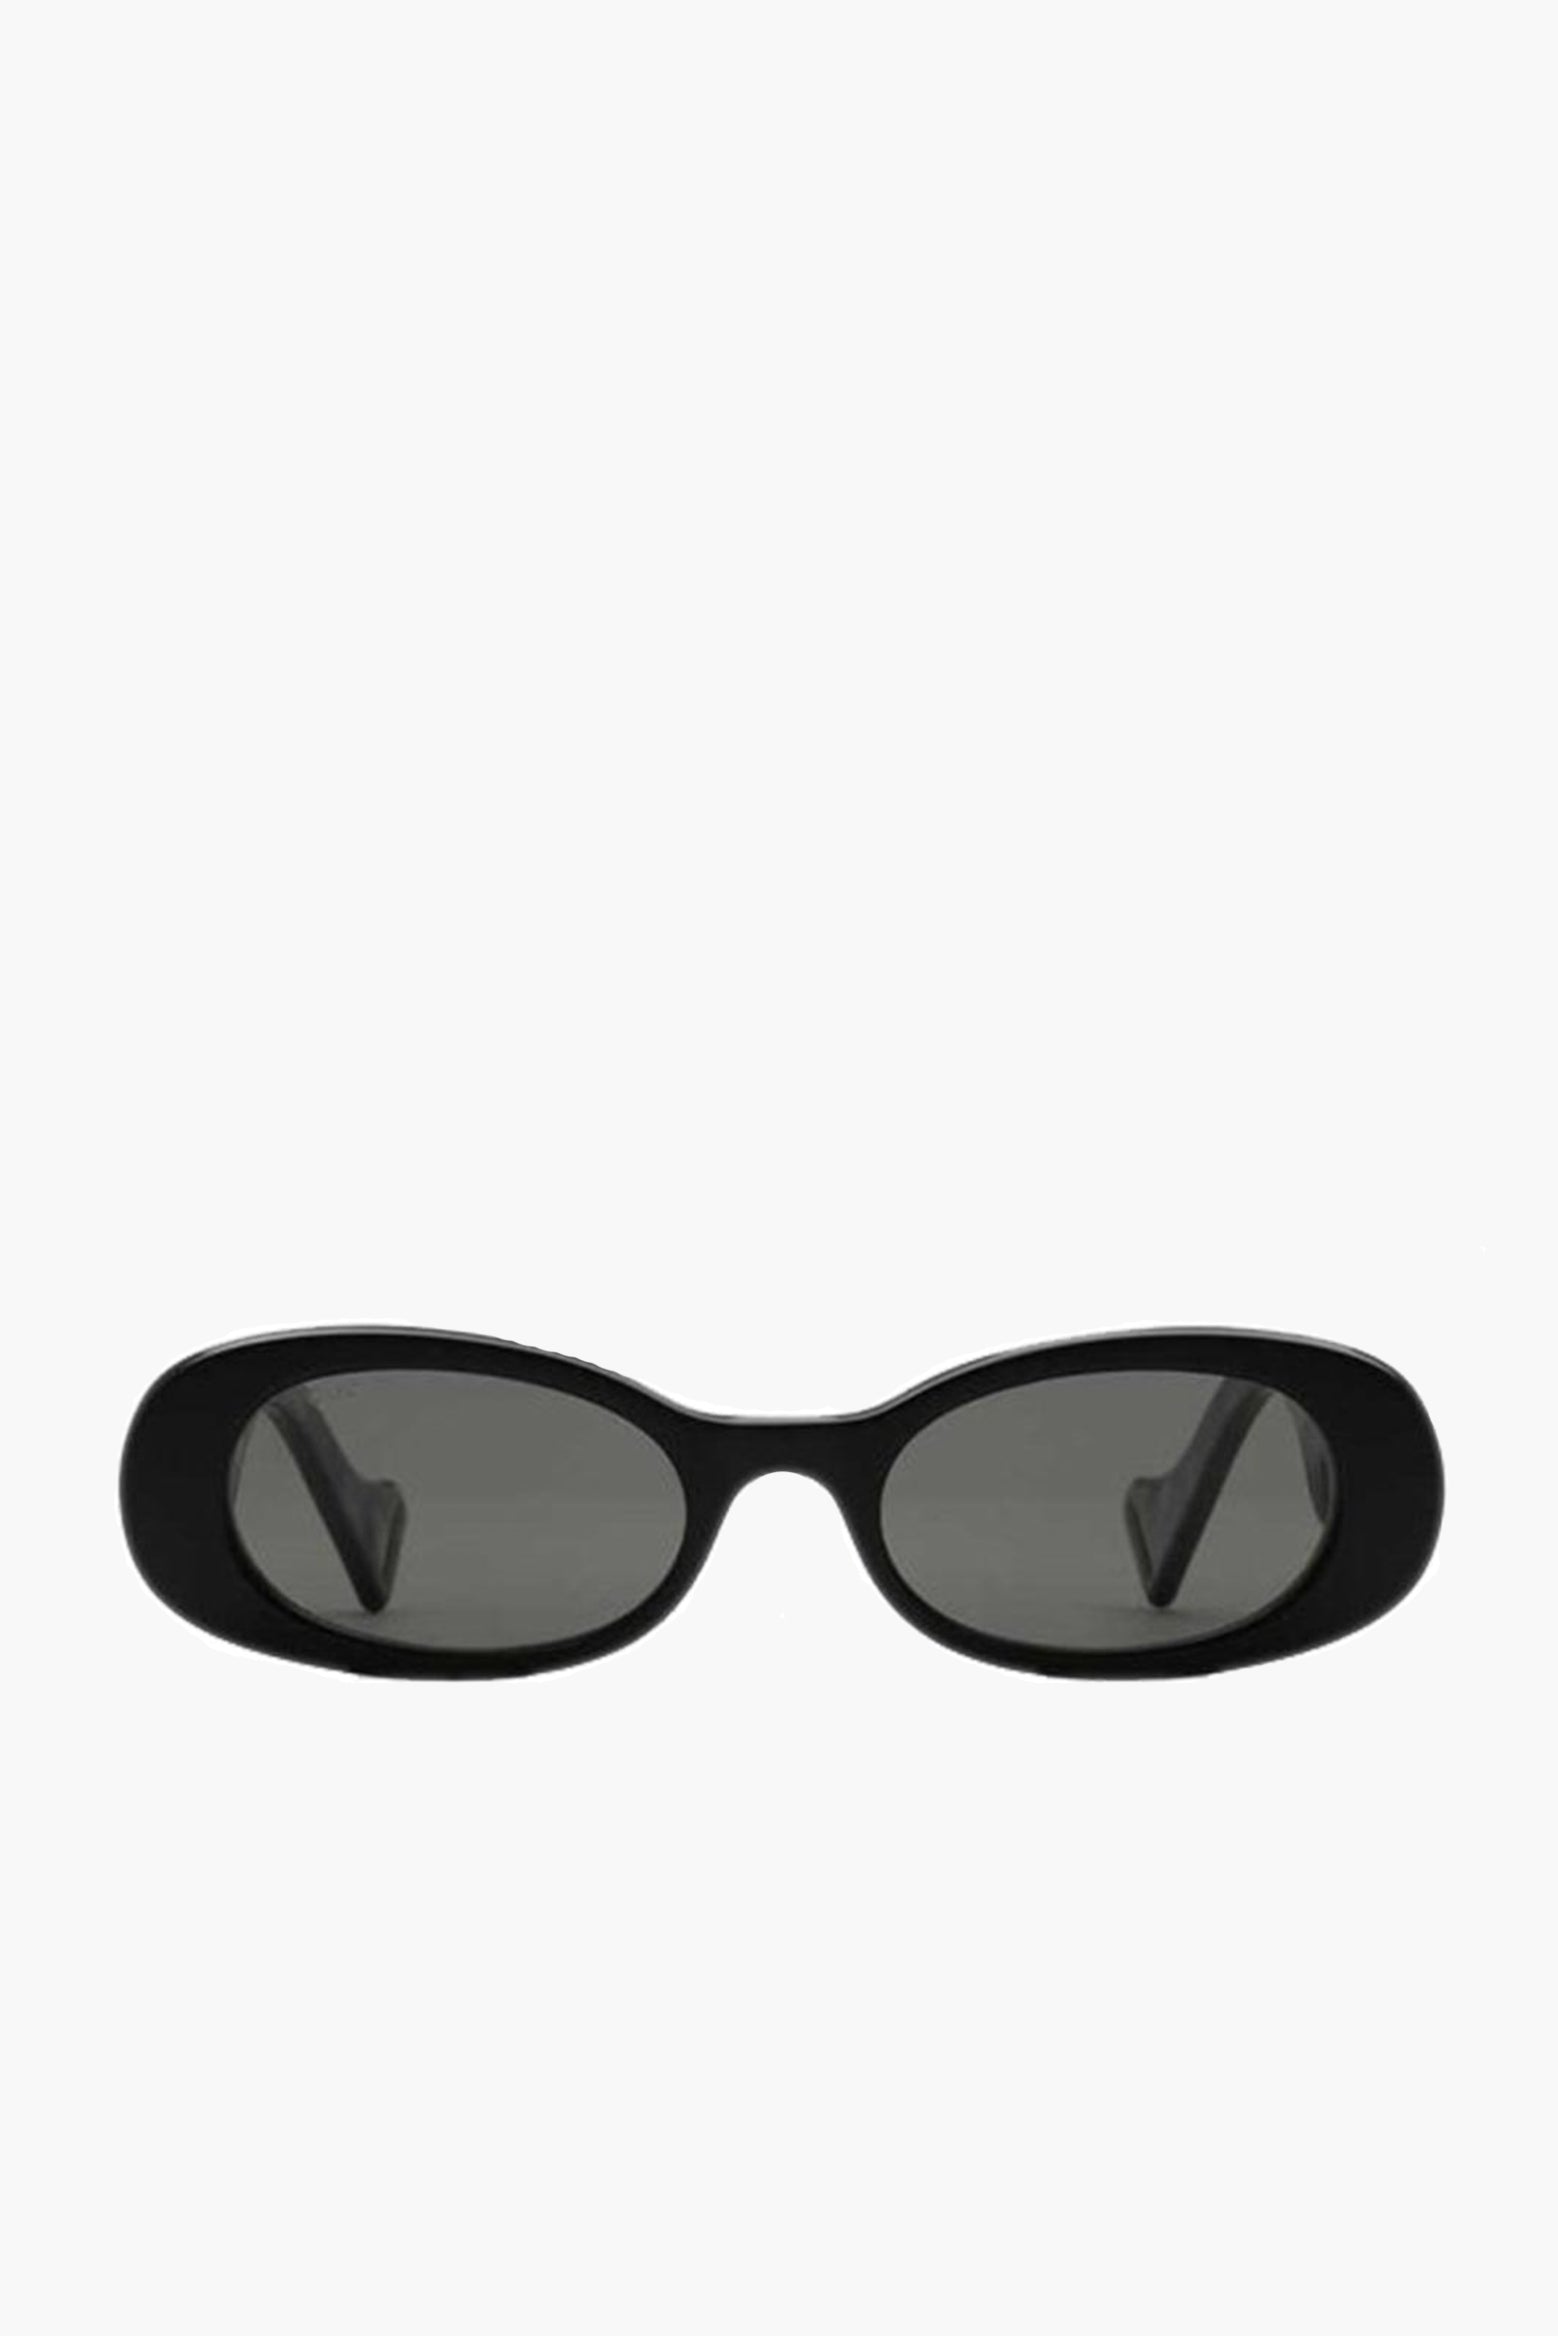 Gucci Oval Sunglasses in Black available at The New Trend Australia.